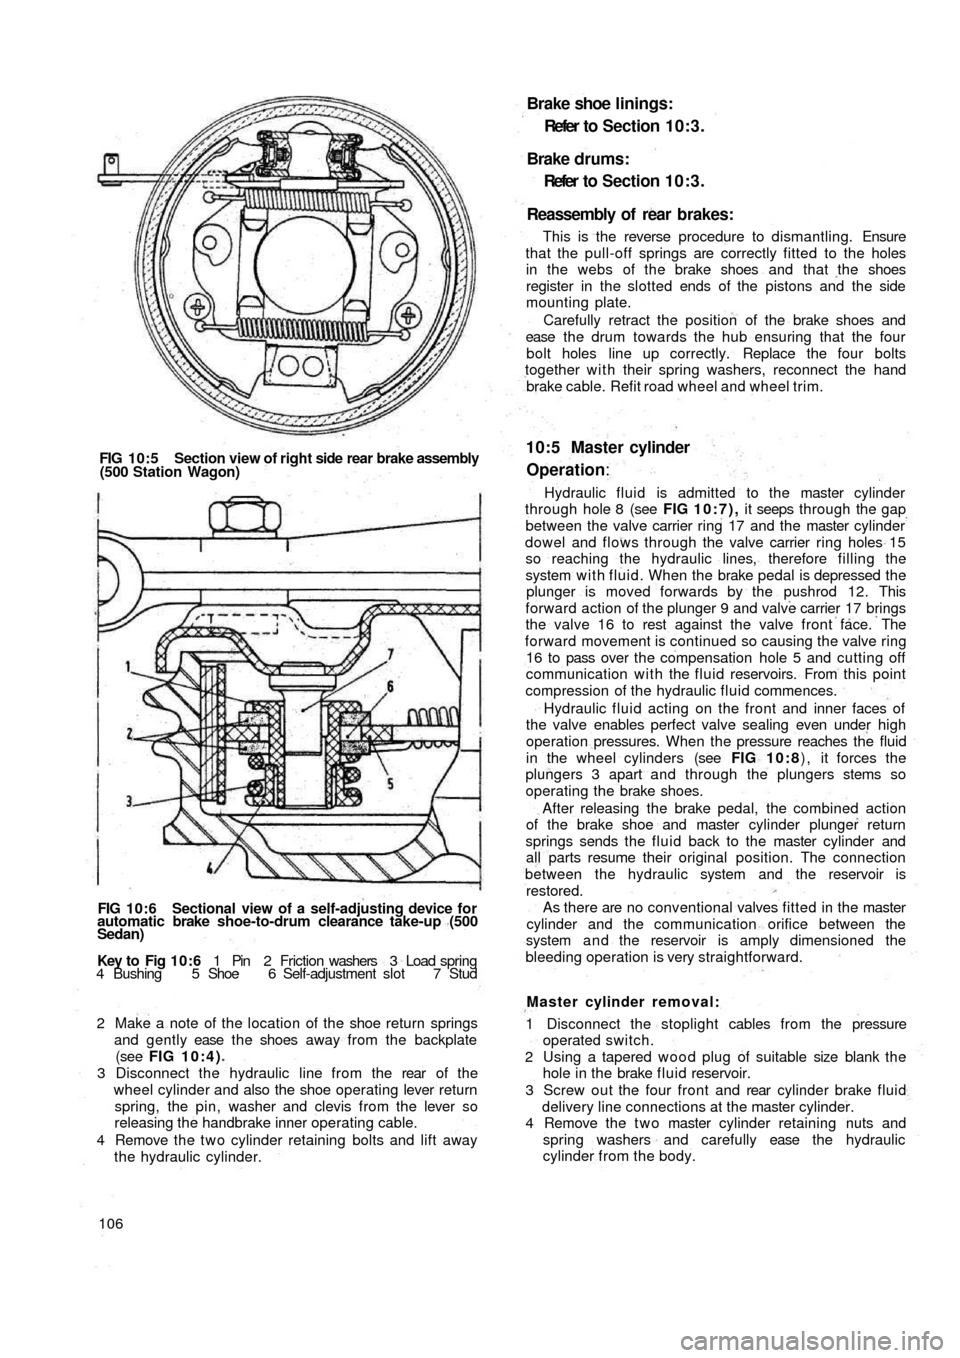 FIAT 500 1972 1.G Workshop Manual FIG 10:5 Section view of right side rear brake assembly
(500 Station Wagon)
FIG 10:6 Sectional view of a self-adjusting device for
automatic brake shoe-to-drum clearance take-up (500
Sedan)
Key  to   